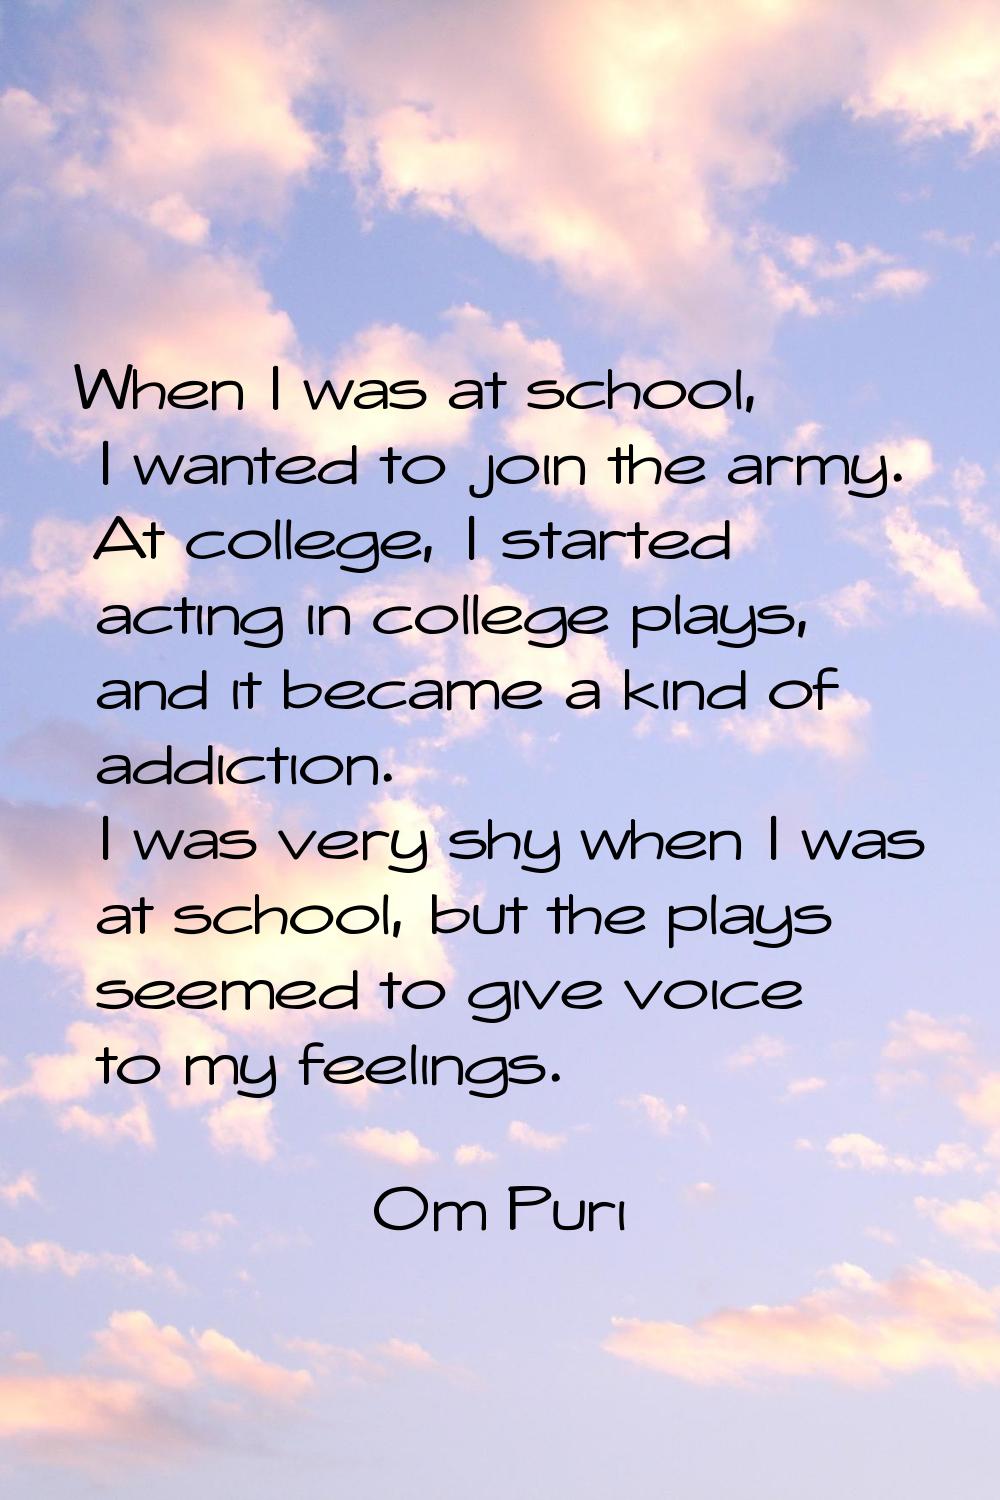 When I was at school, I wanted to join the army. At college, I started acting in college plays, and